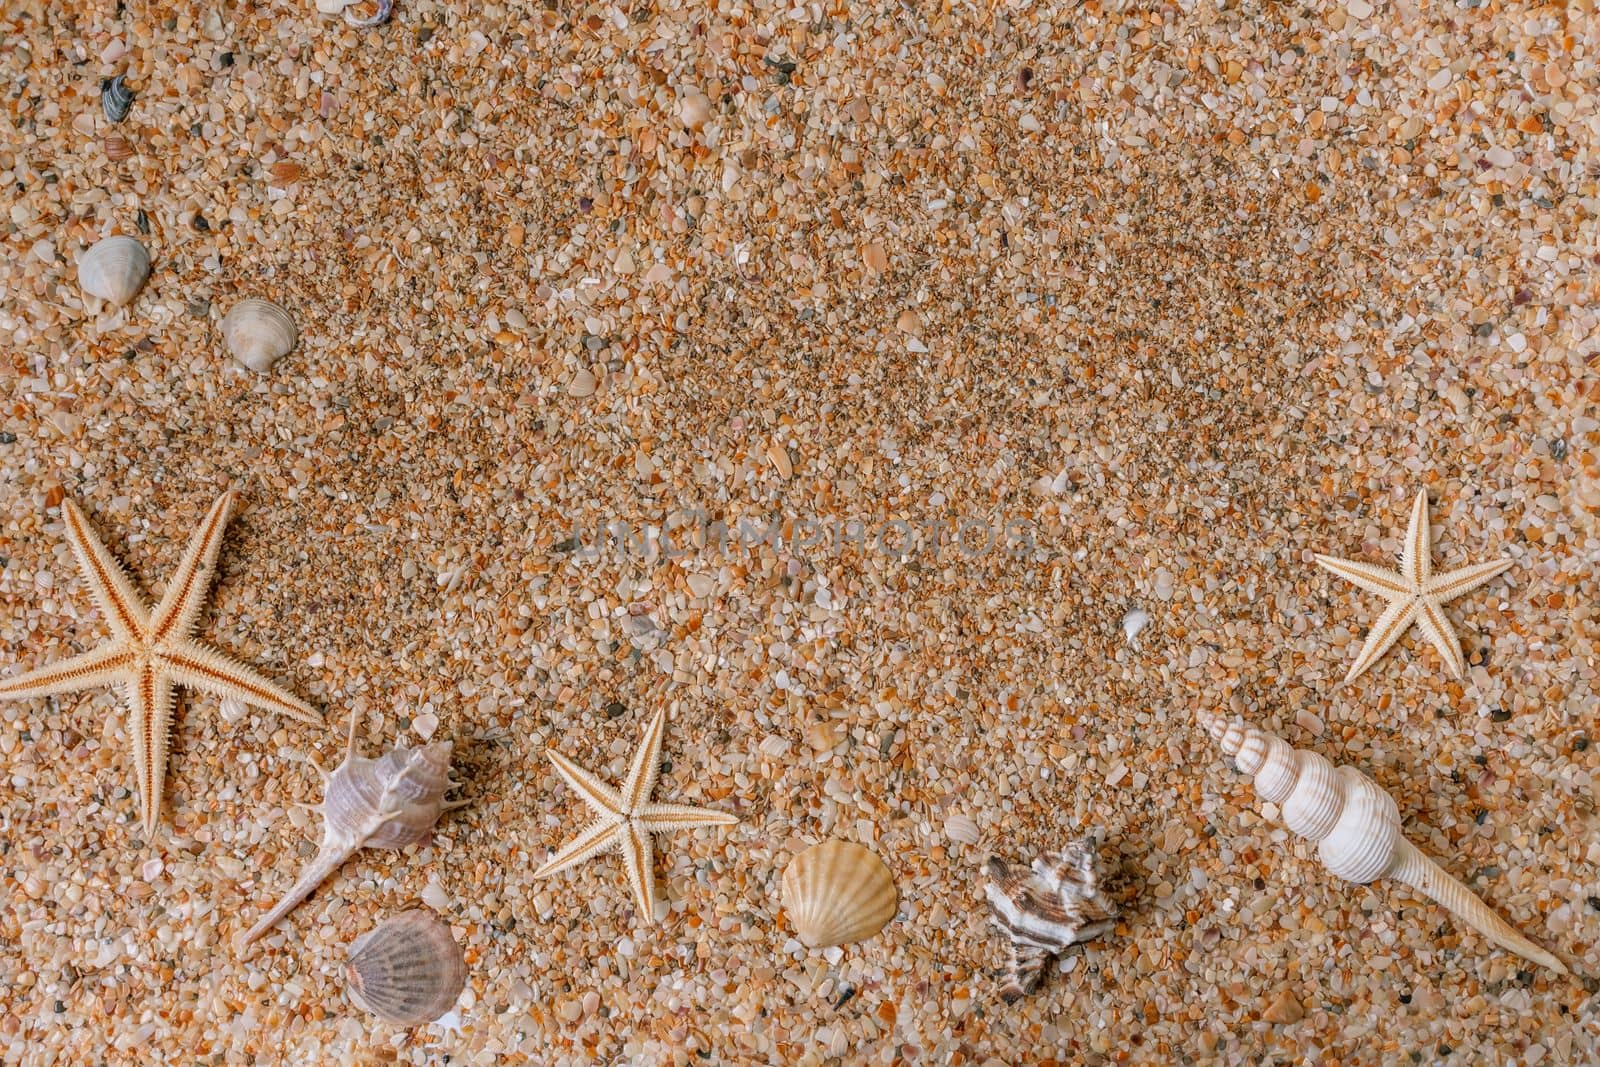 Sand shells background. Summer time concept with sea shells and starfish on the sand.